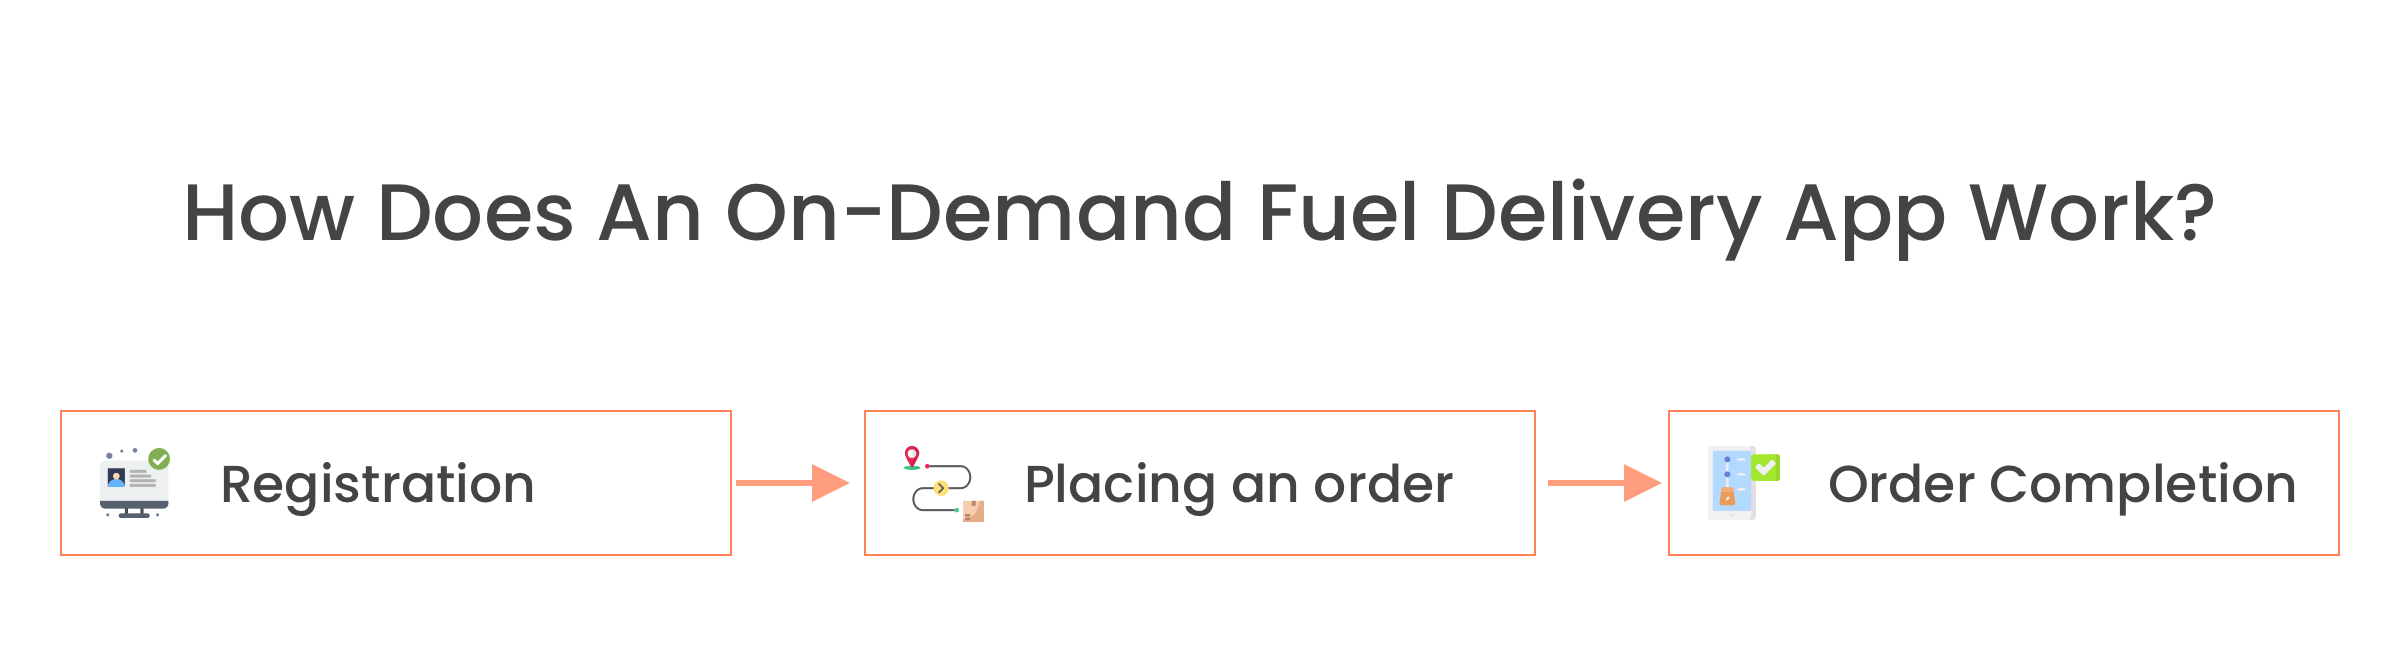 How Does an On-Demand Fuel Delivery App Work